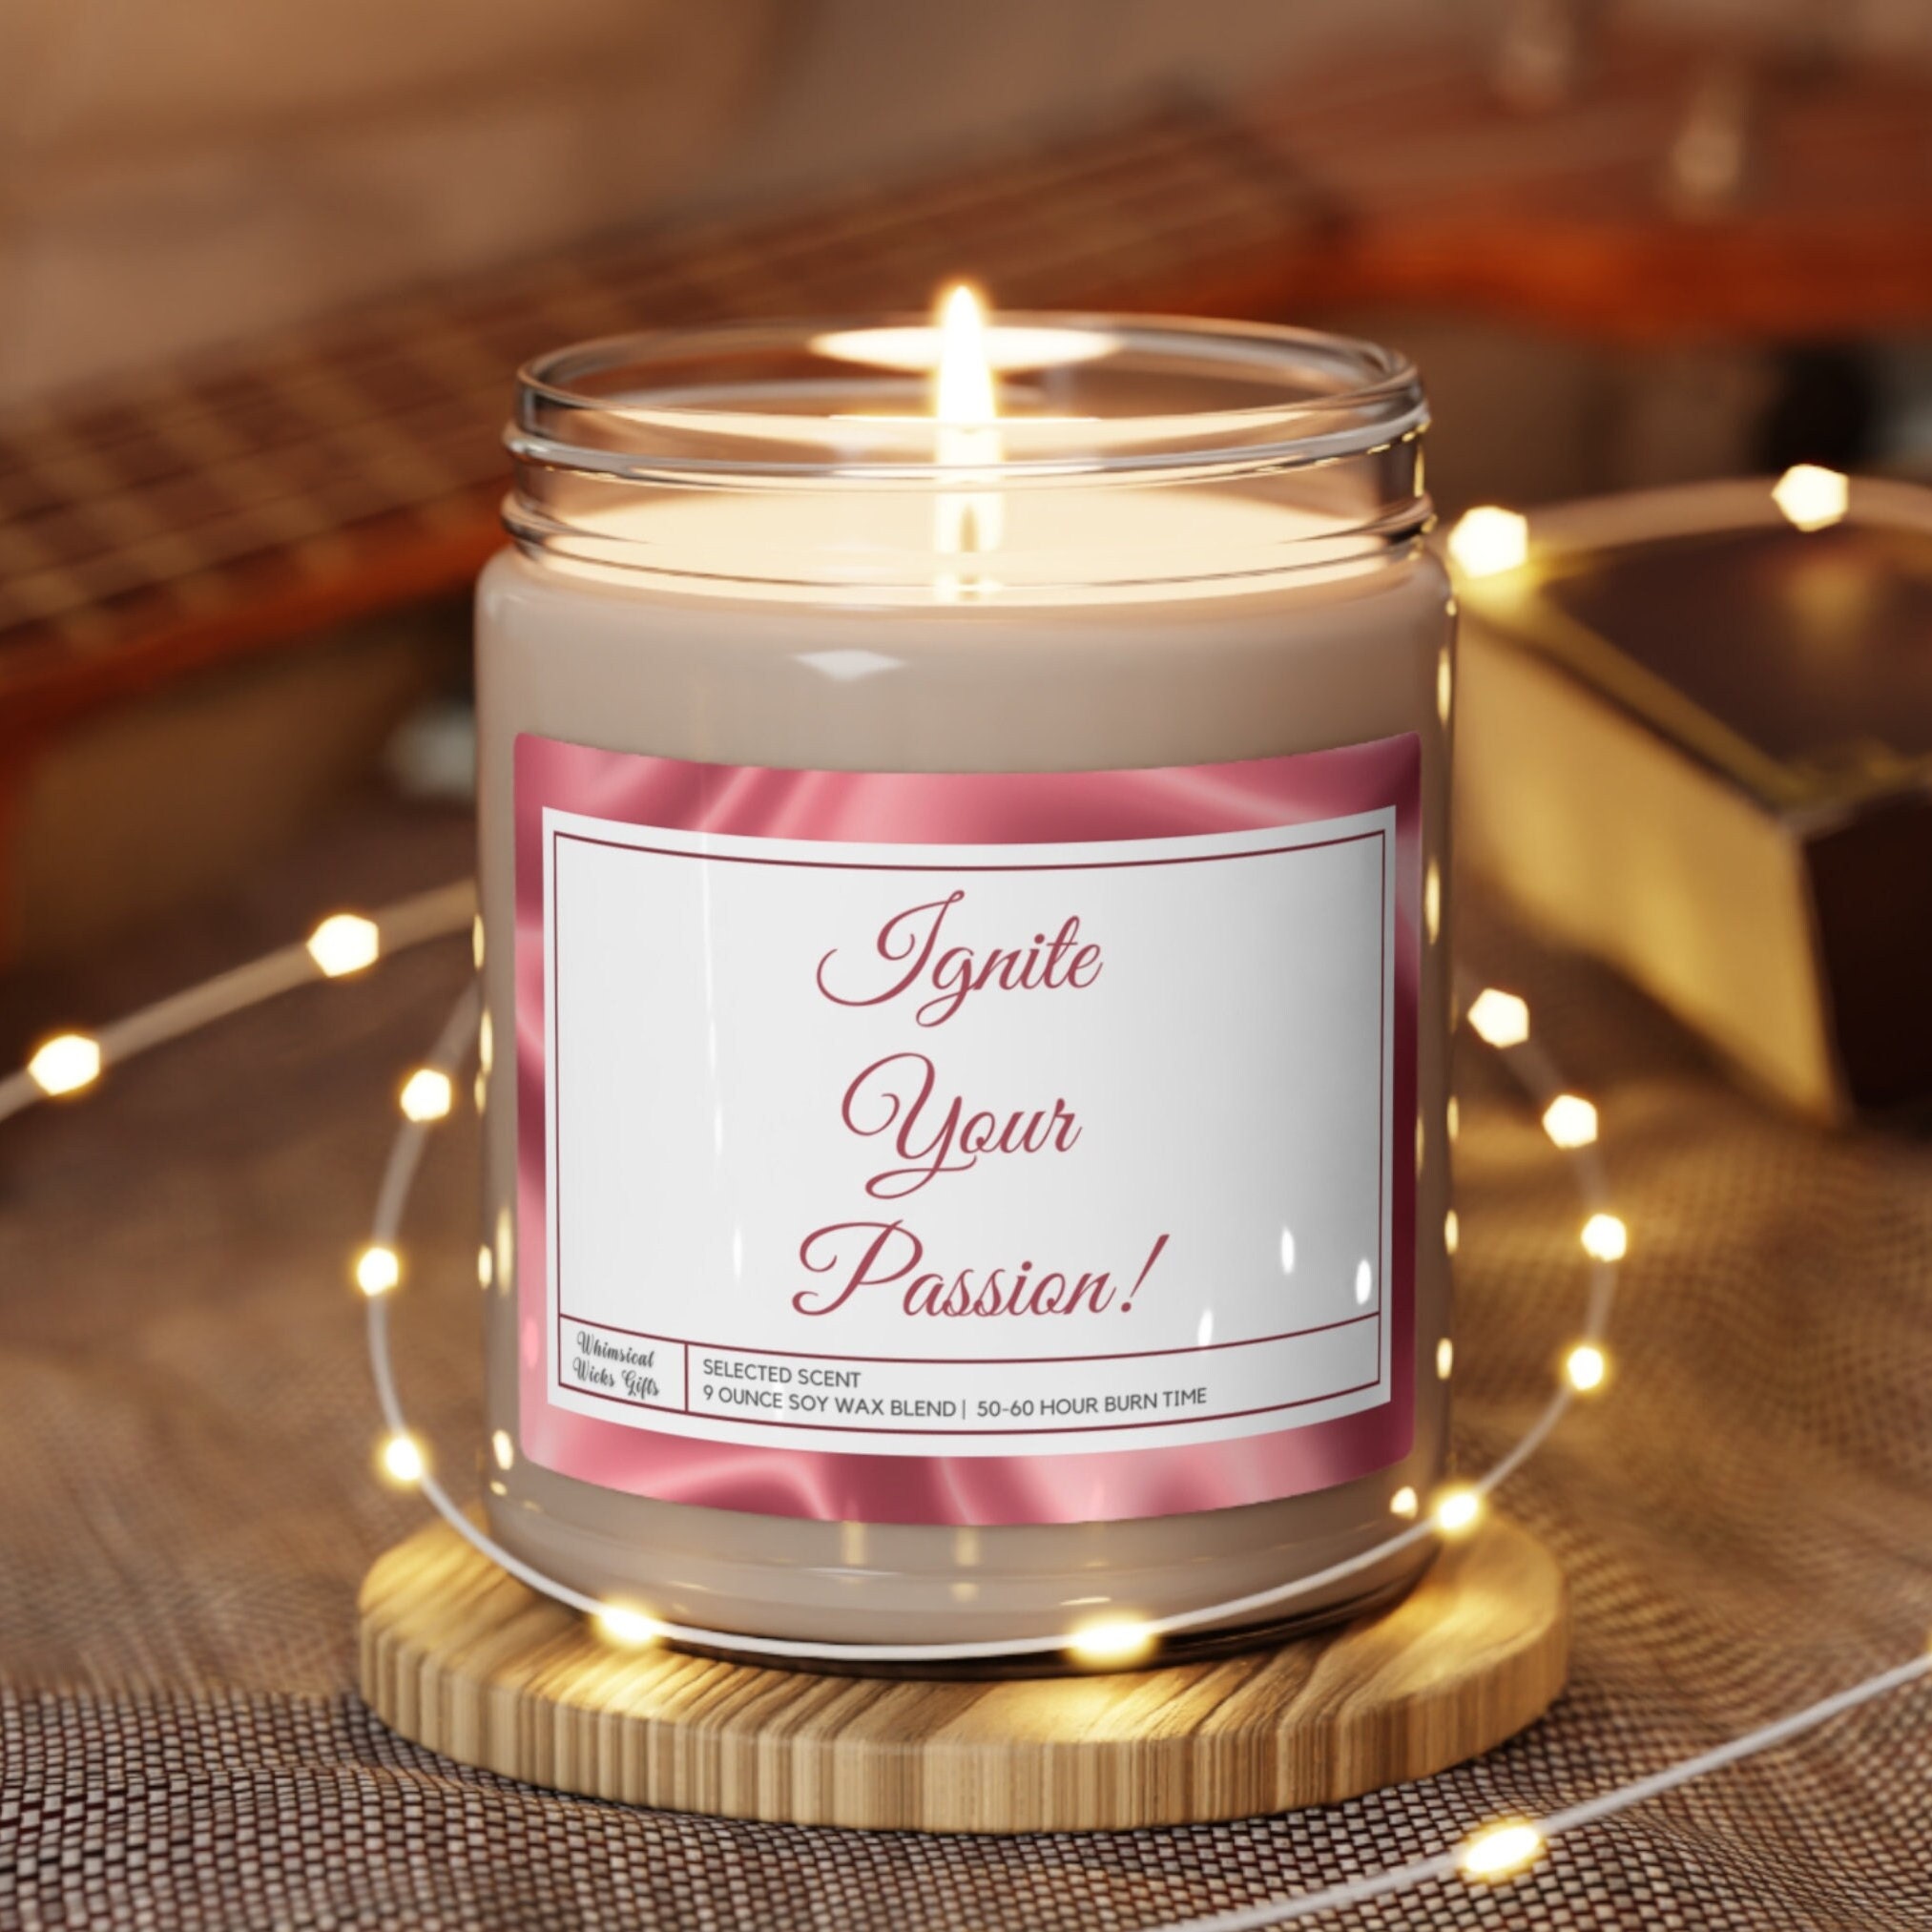 Ignite Your Passion and Purpose Candle, Long-lasting Natural Fragrance Soy  Wax Candle, Perfect Home Decor Gift, Encouraging Present 